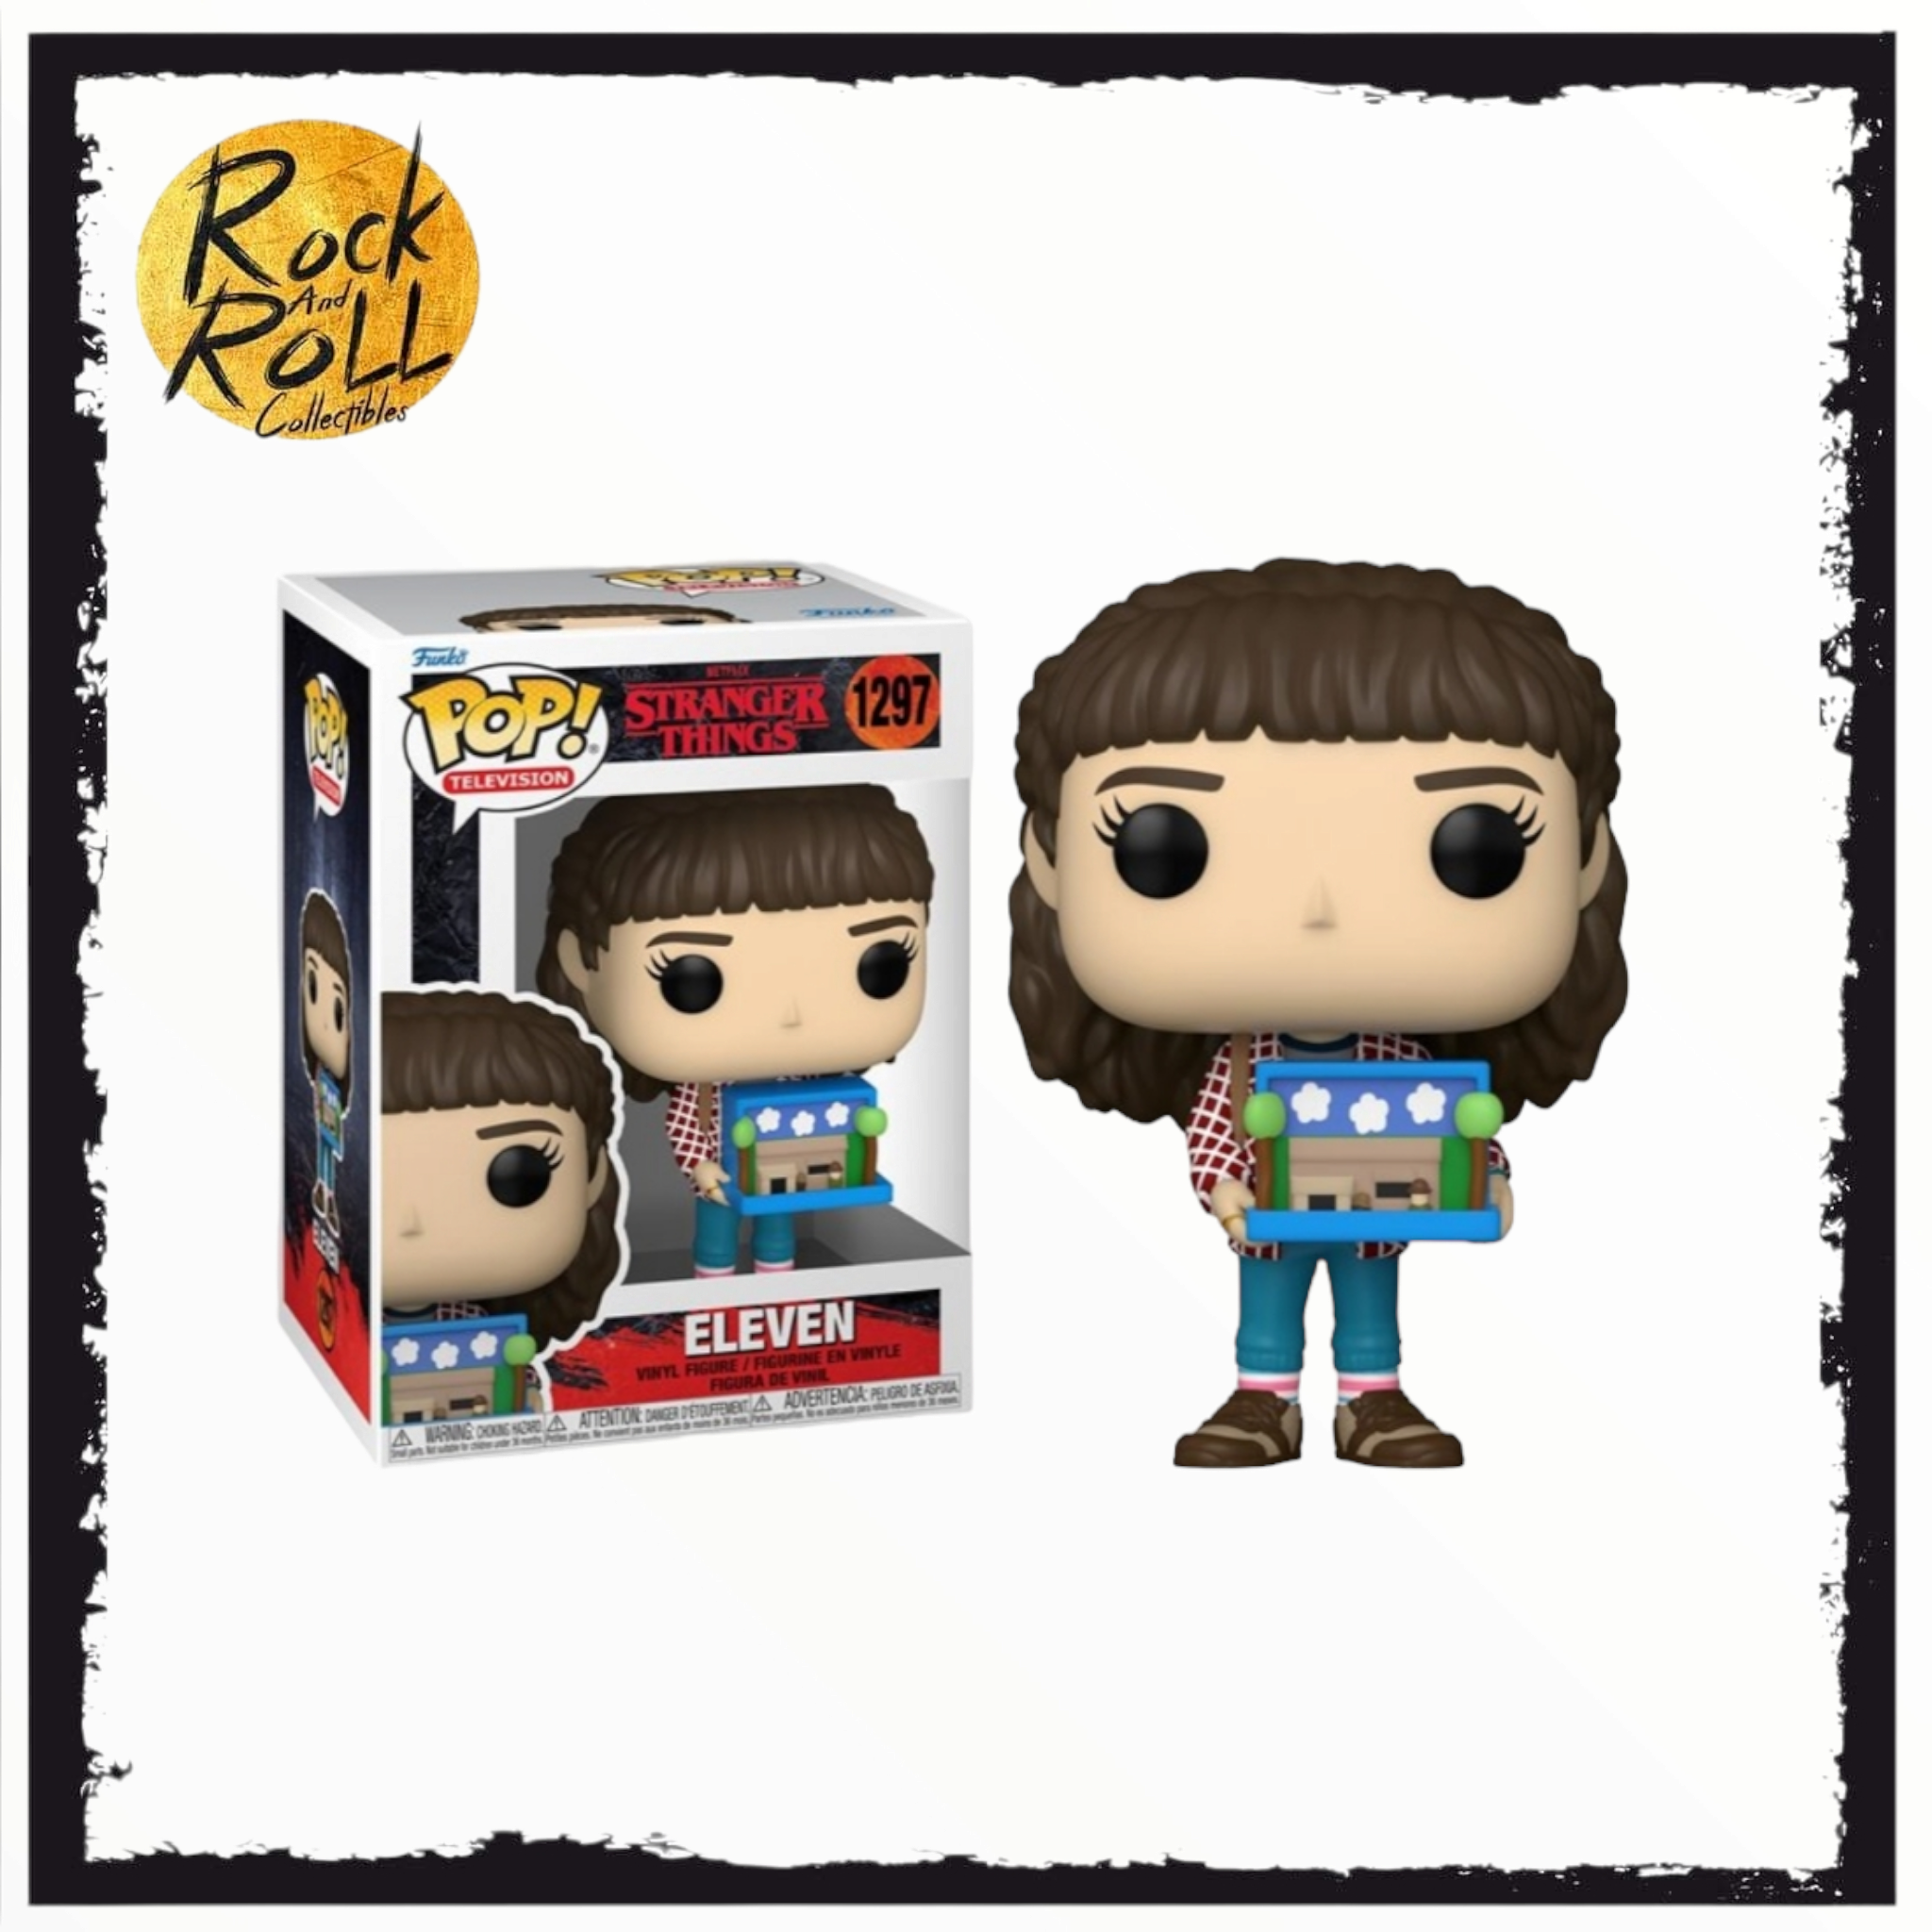 Stranger Things - Max Funko Pop! #1243 – rock and roll collectibles